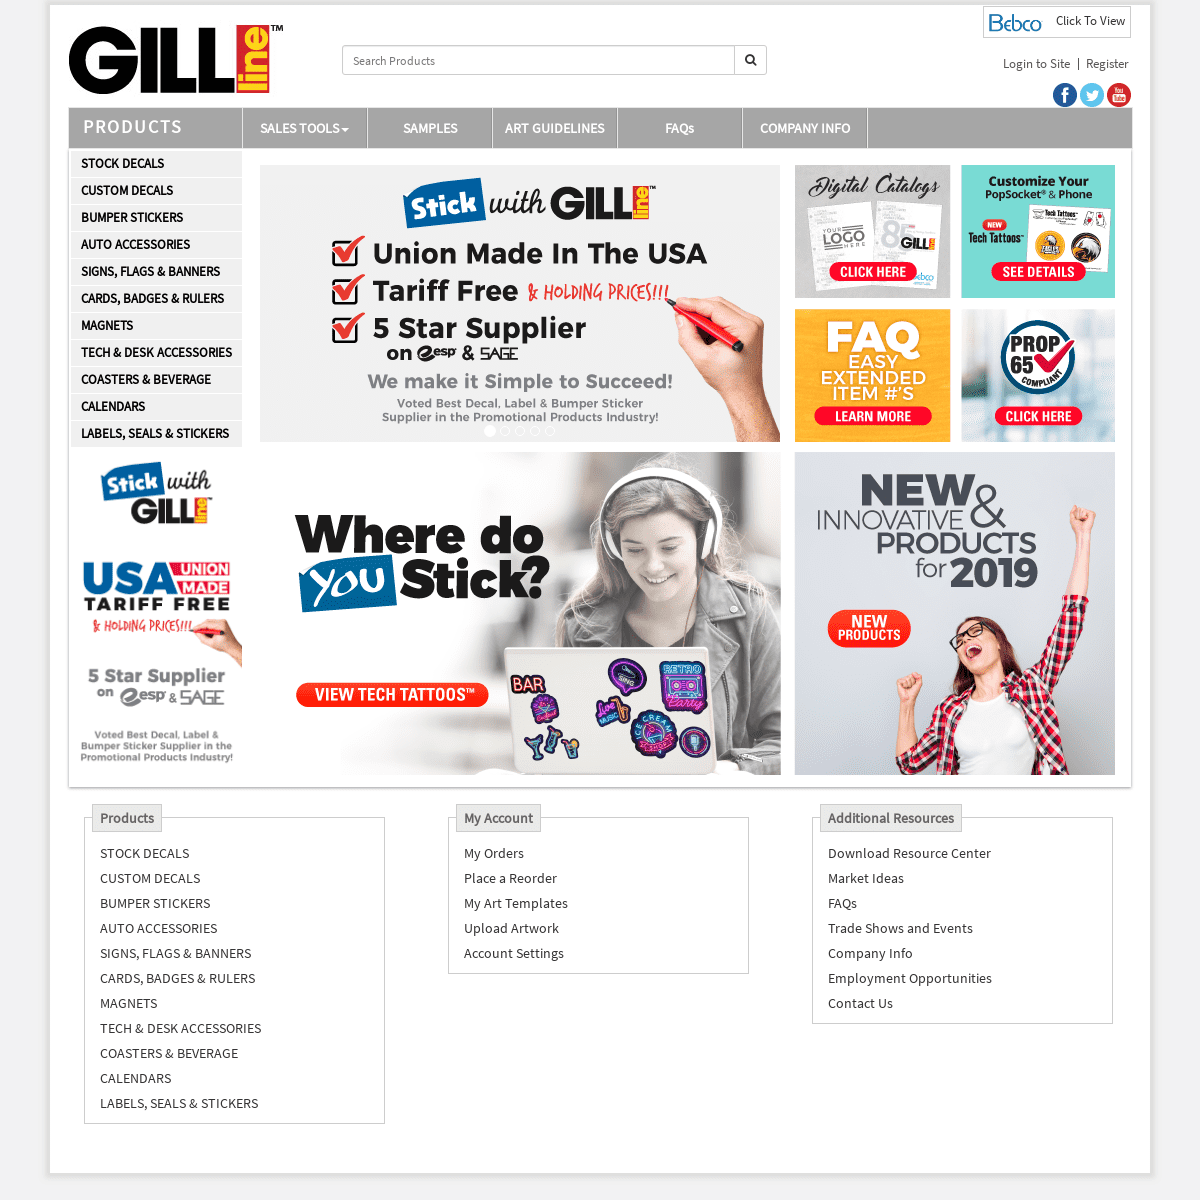 A complete backup of gill-line.com